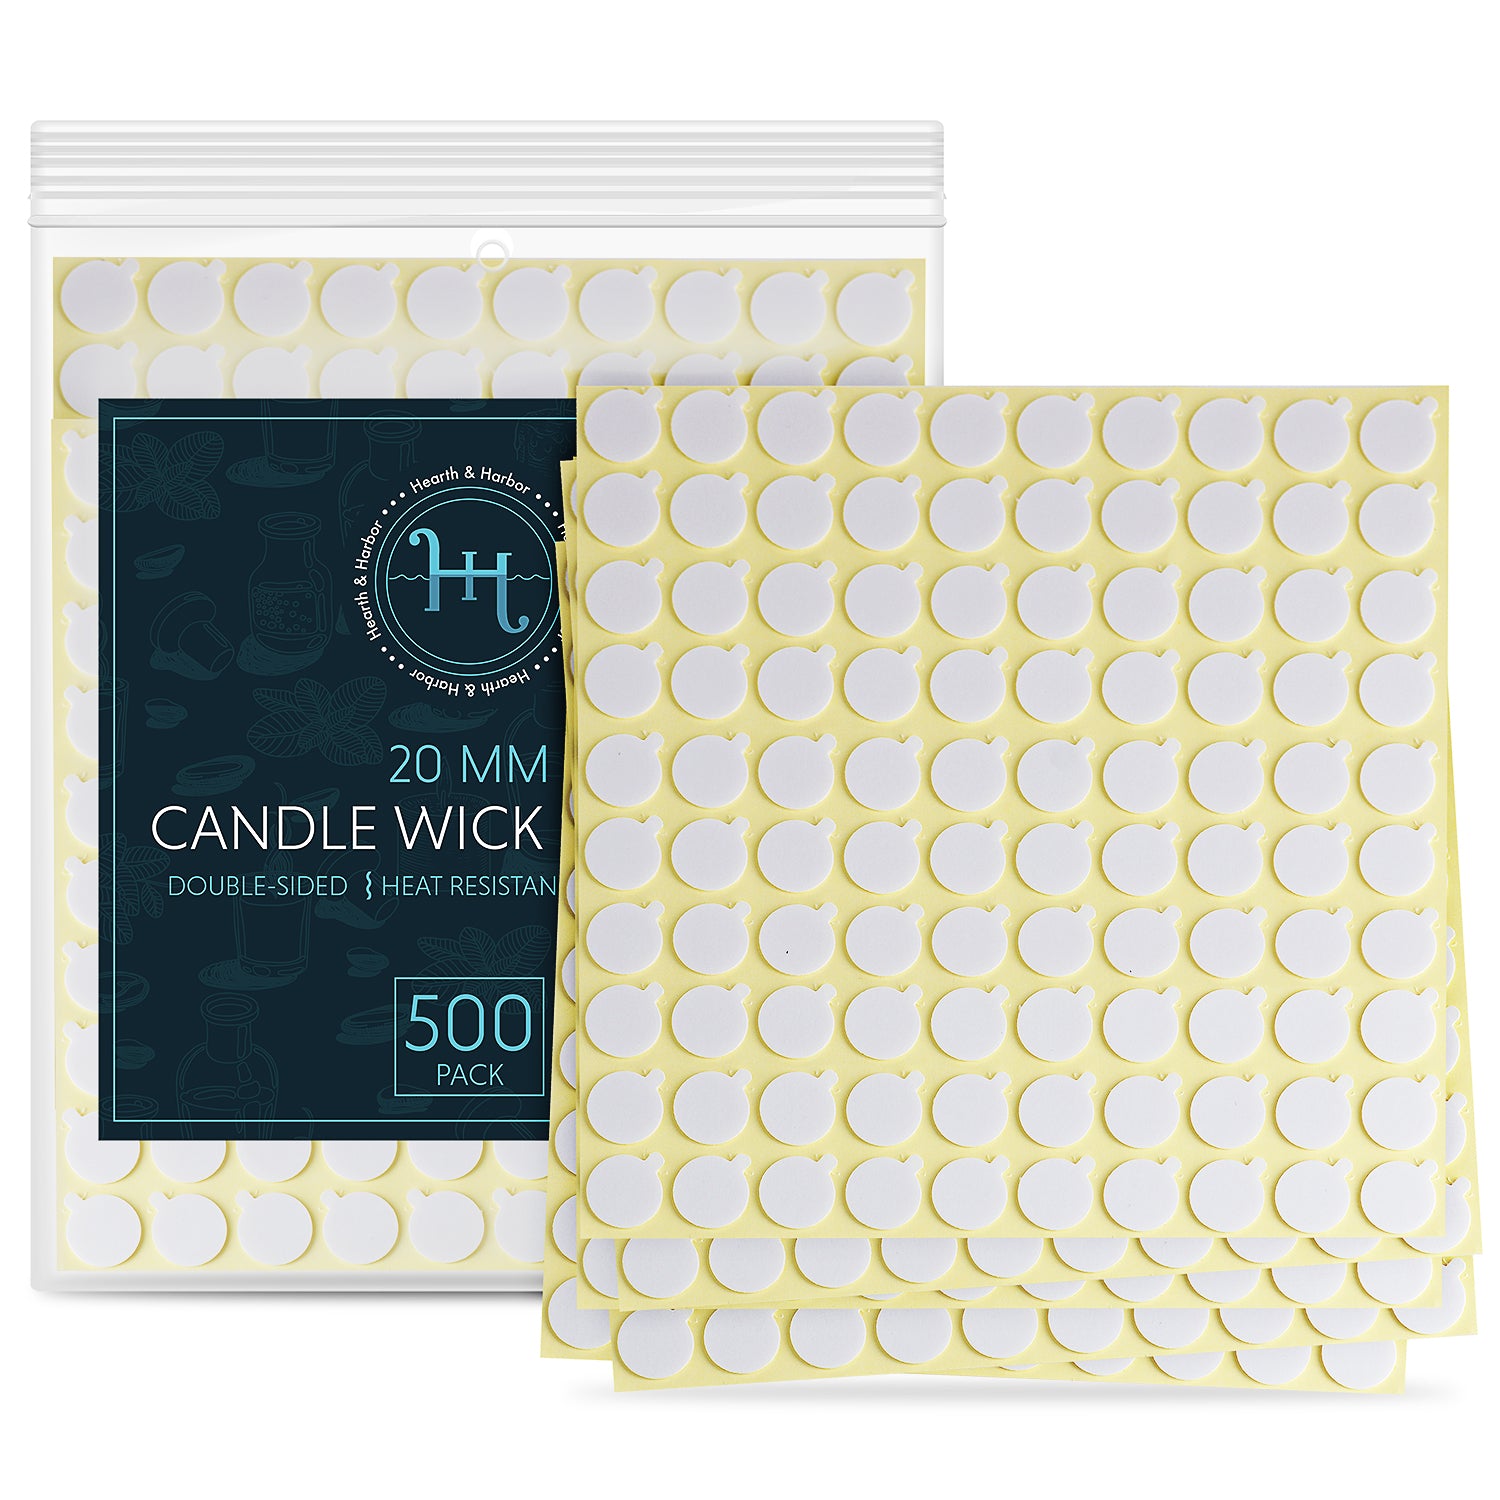 Hearth & Harbor Candle Wick Stickers - 500-Pack of Double-Sided